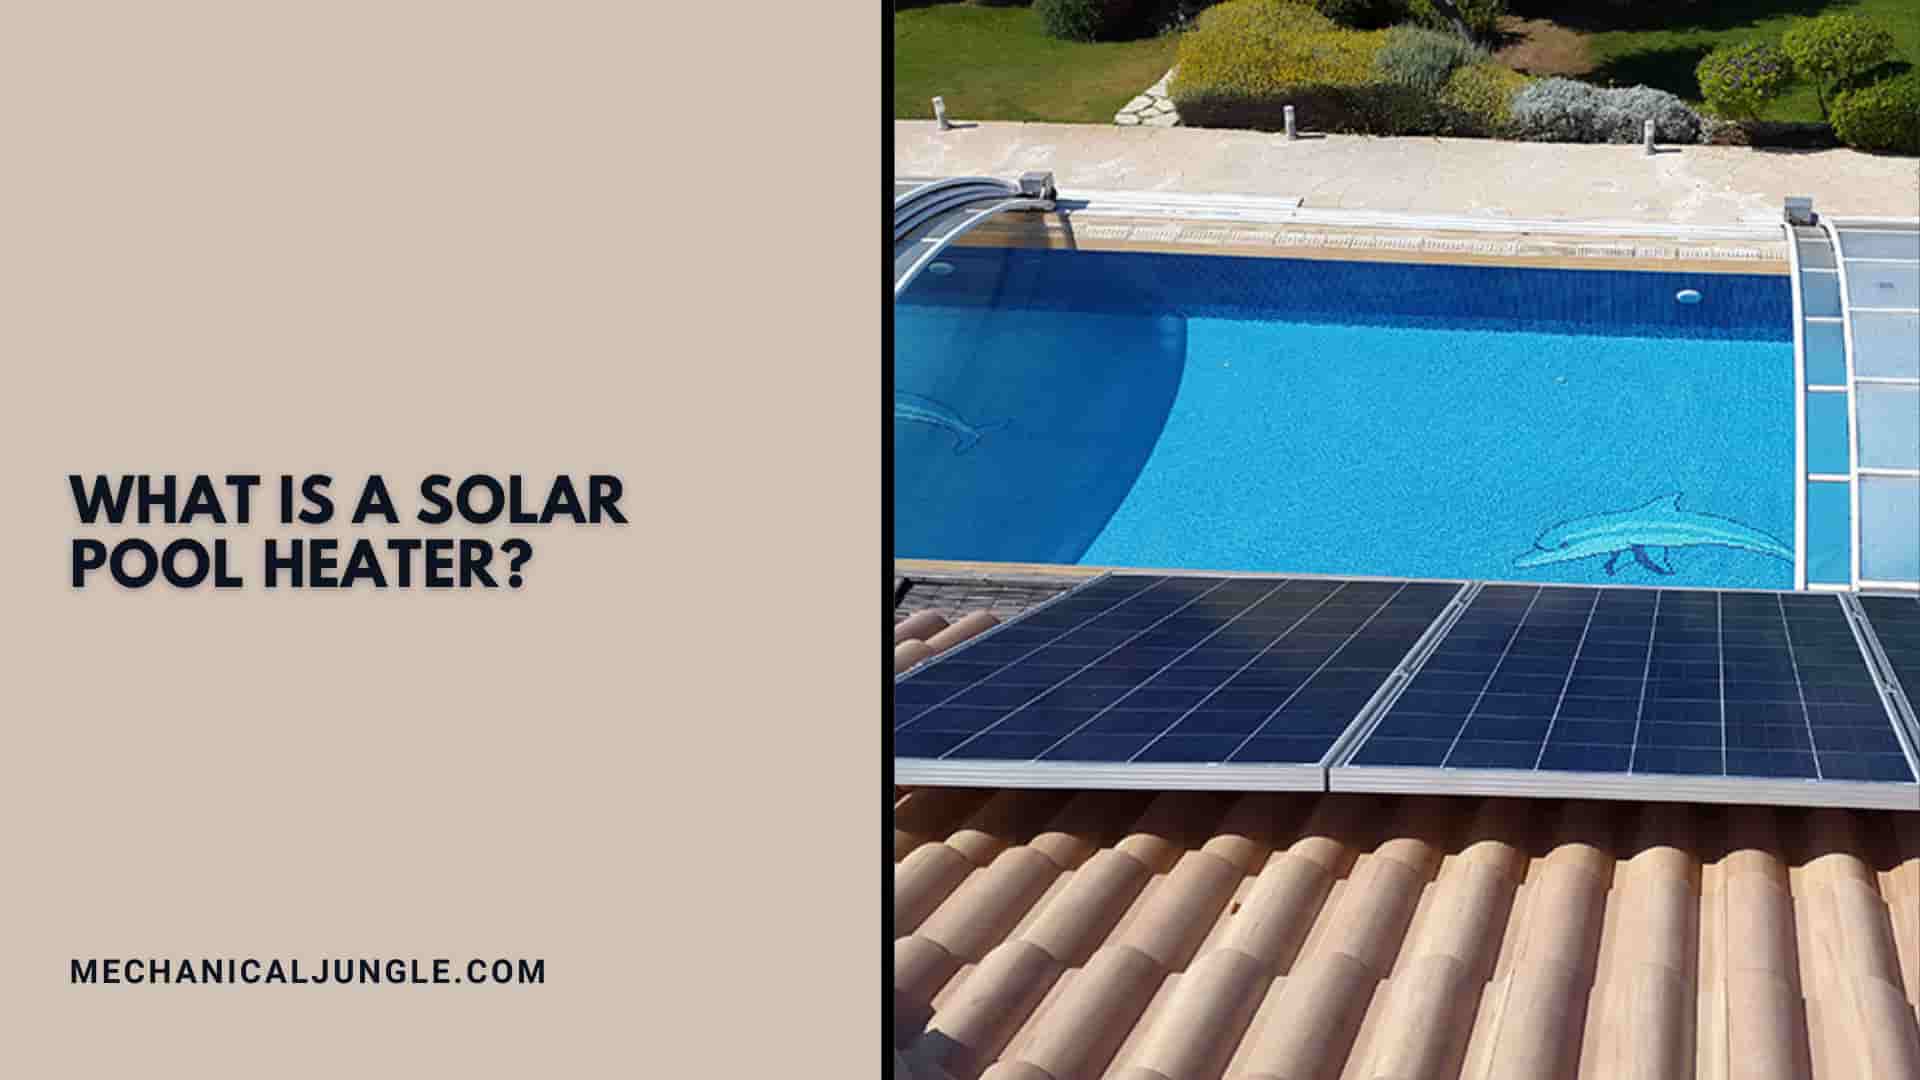 What Is a Solar Pool Heater?